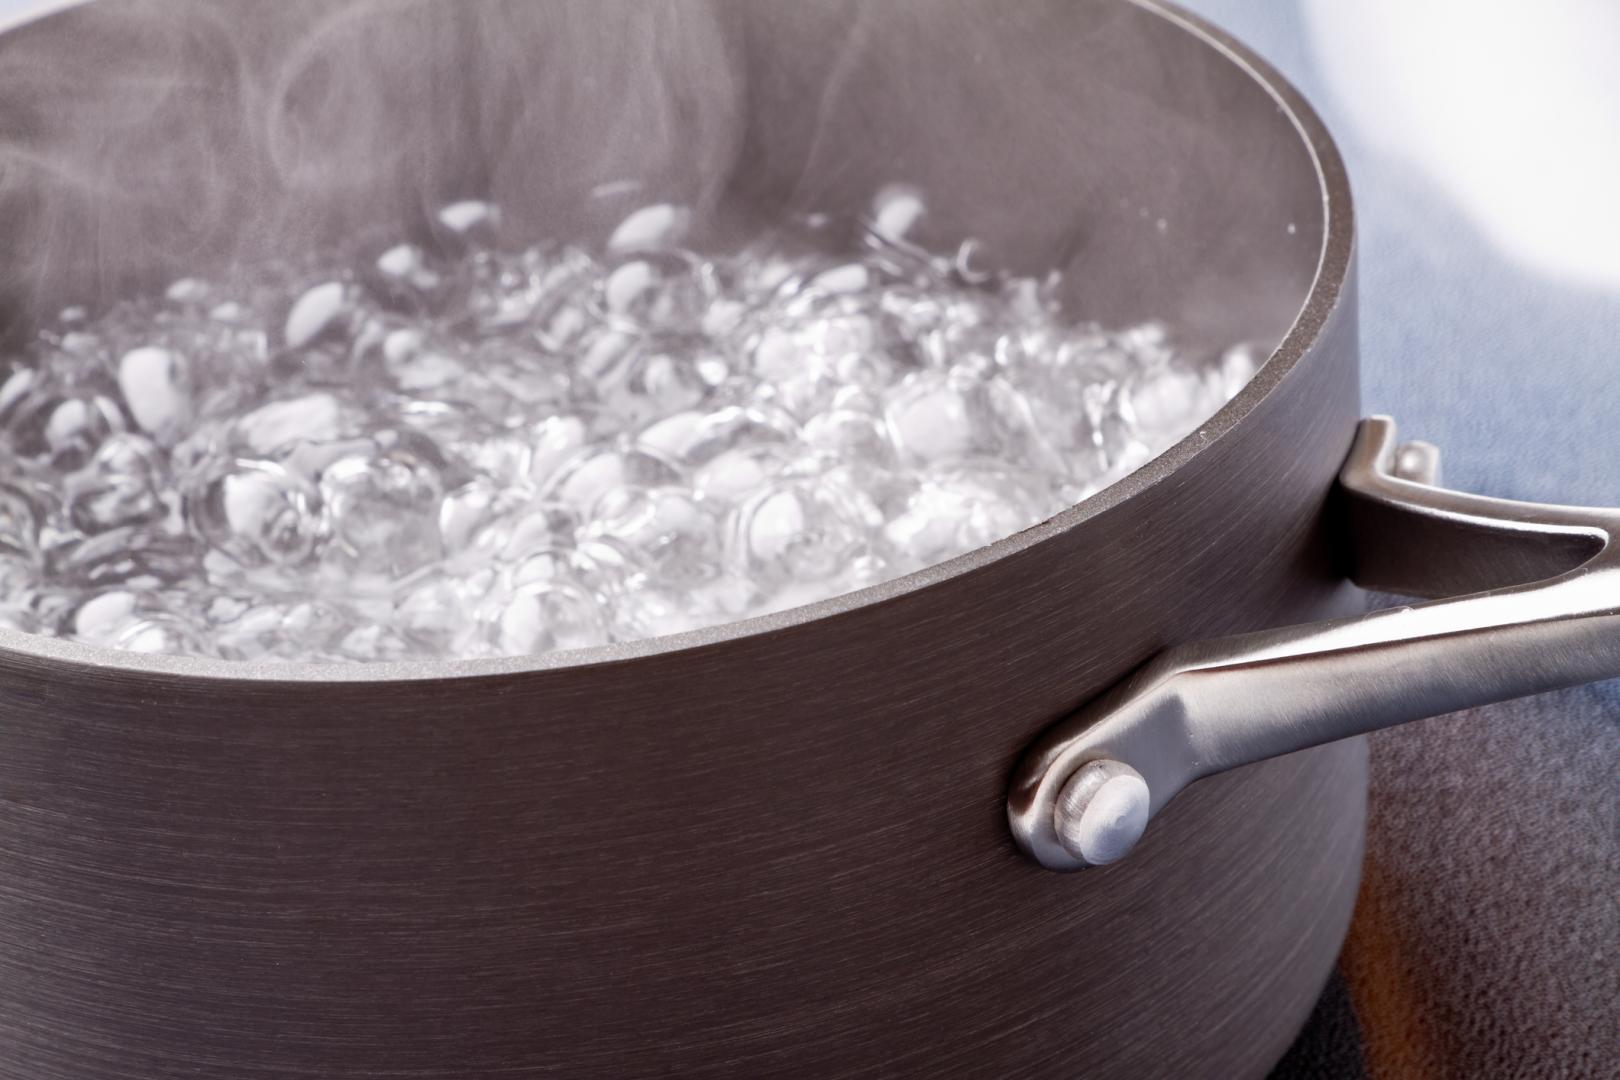 How to Use Water Safely in Your Food Establishment During a Voluntary Boil Order Advisory